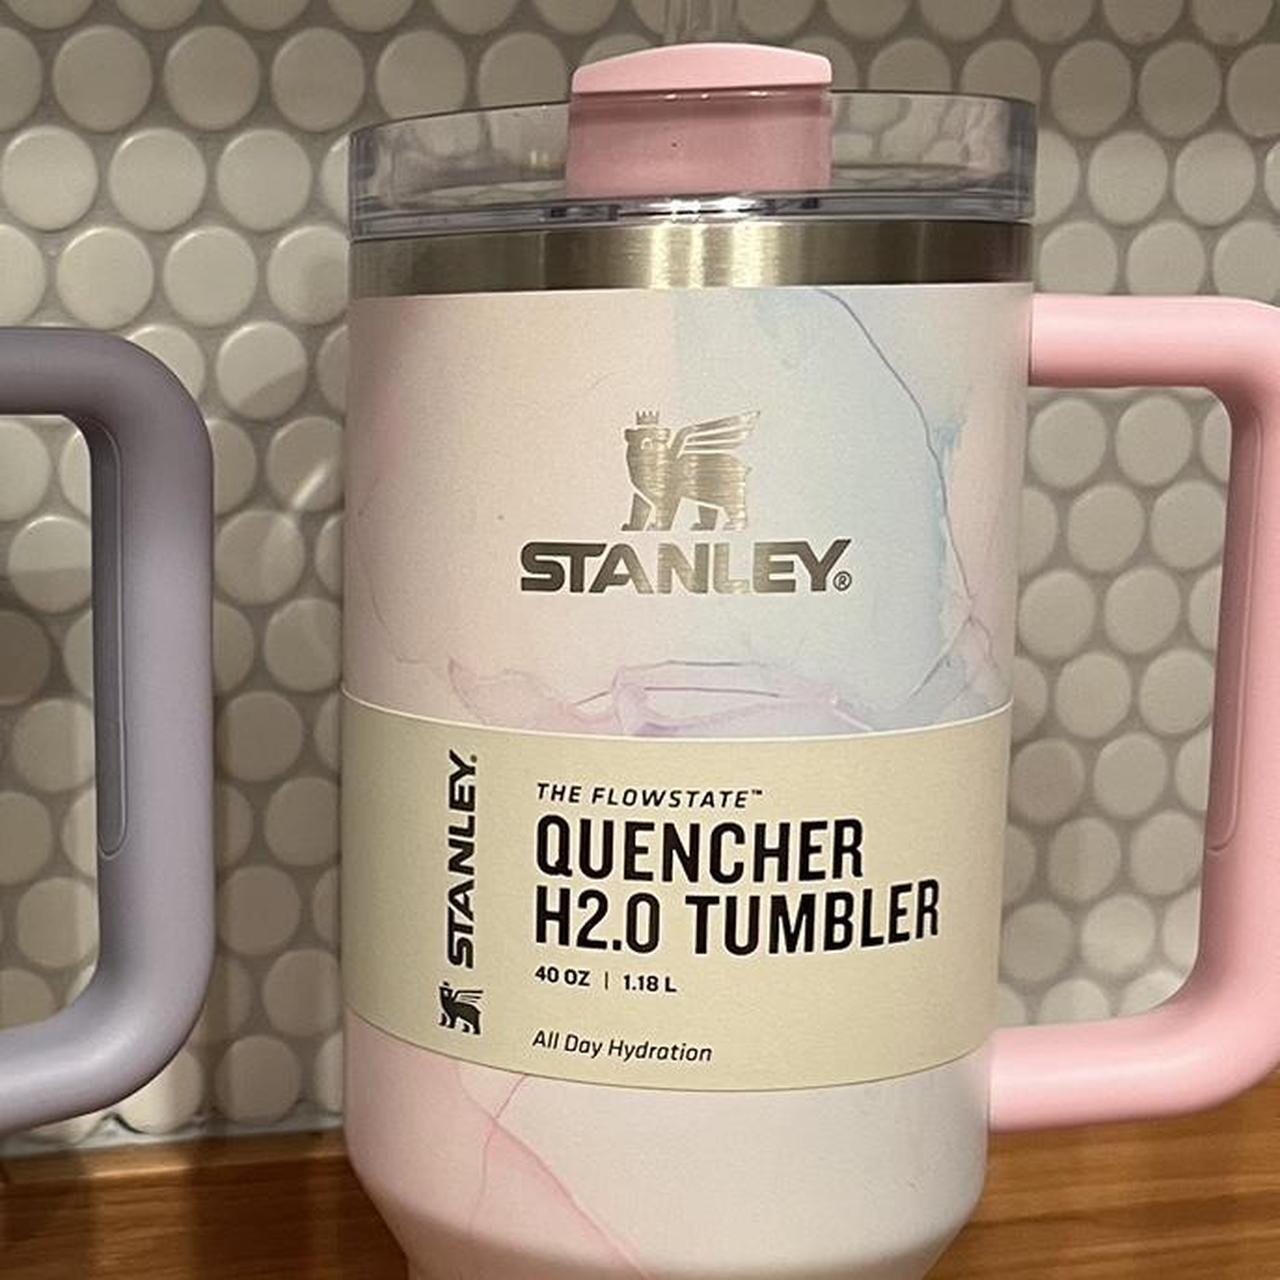 SHIPS TODAY! Stanley Sizzling Pink 30oz Quencher H2.0 New Target